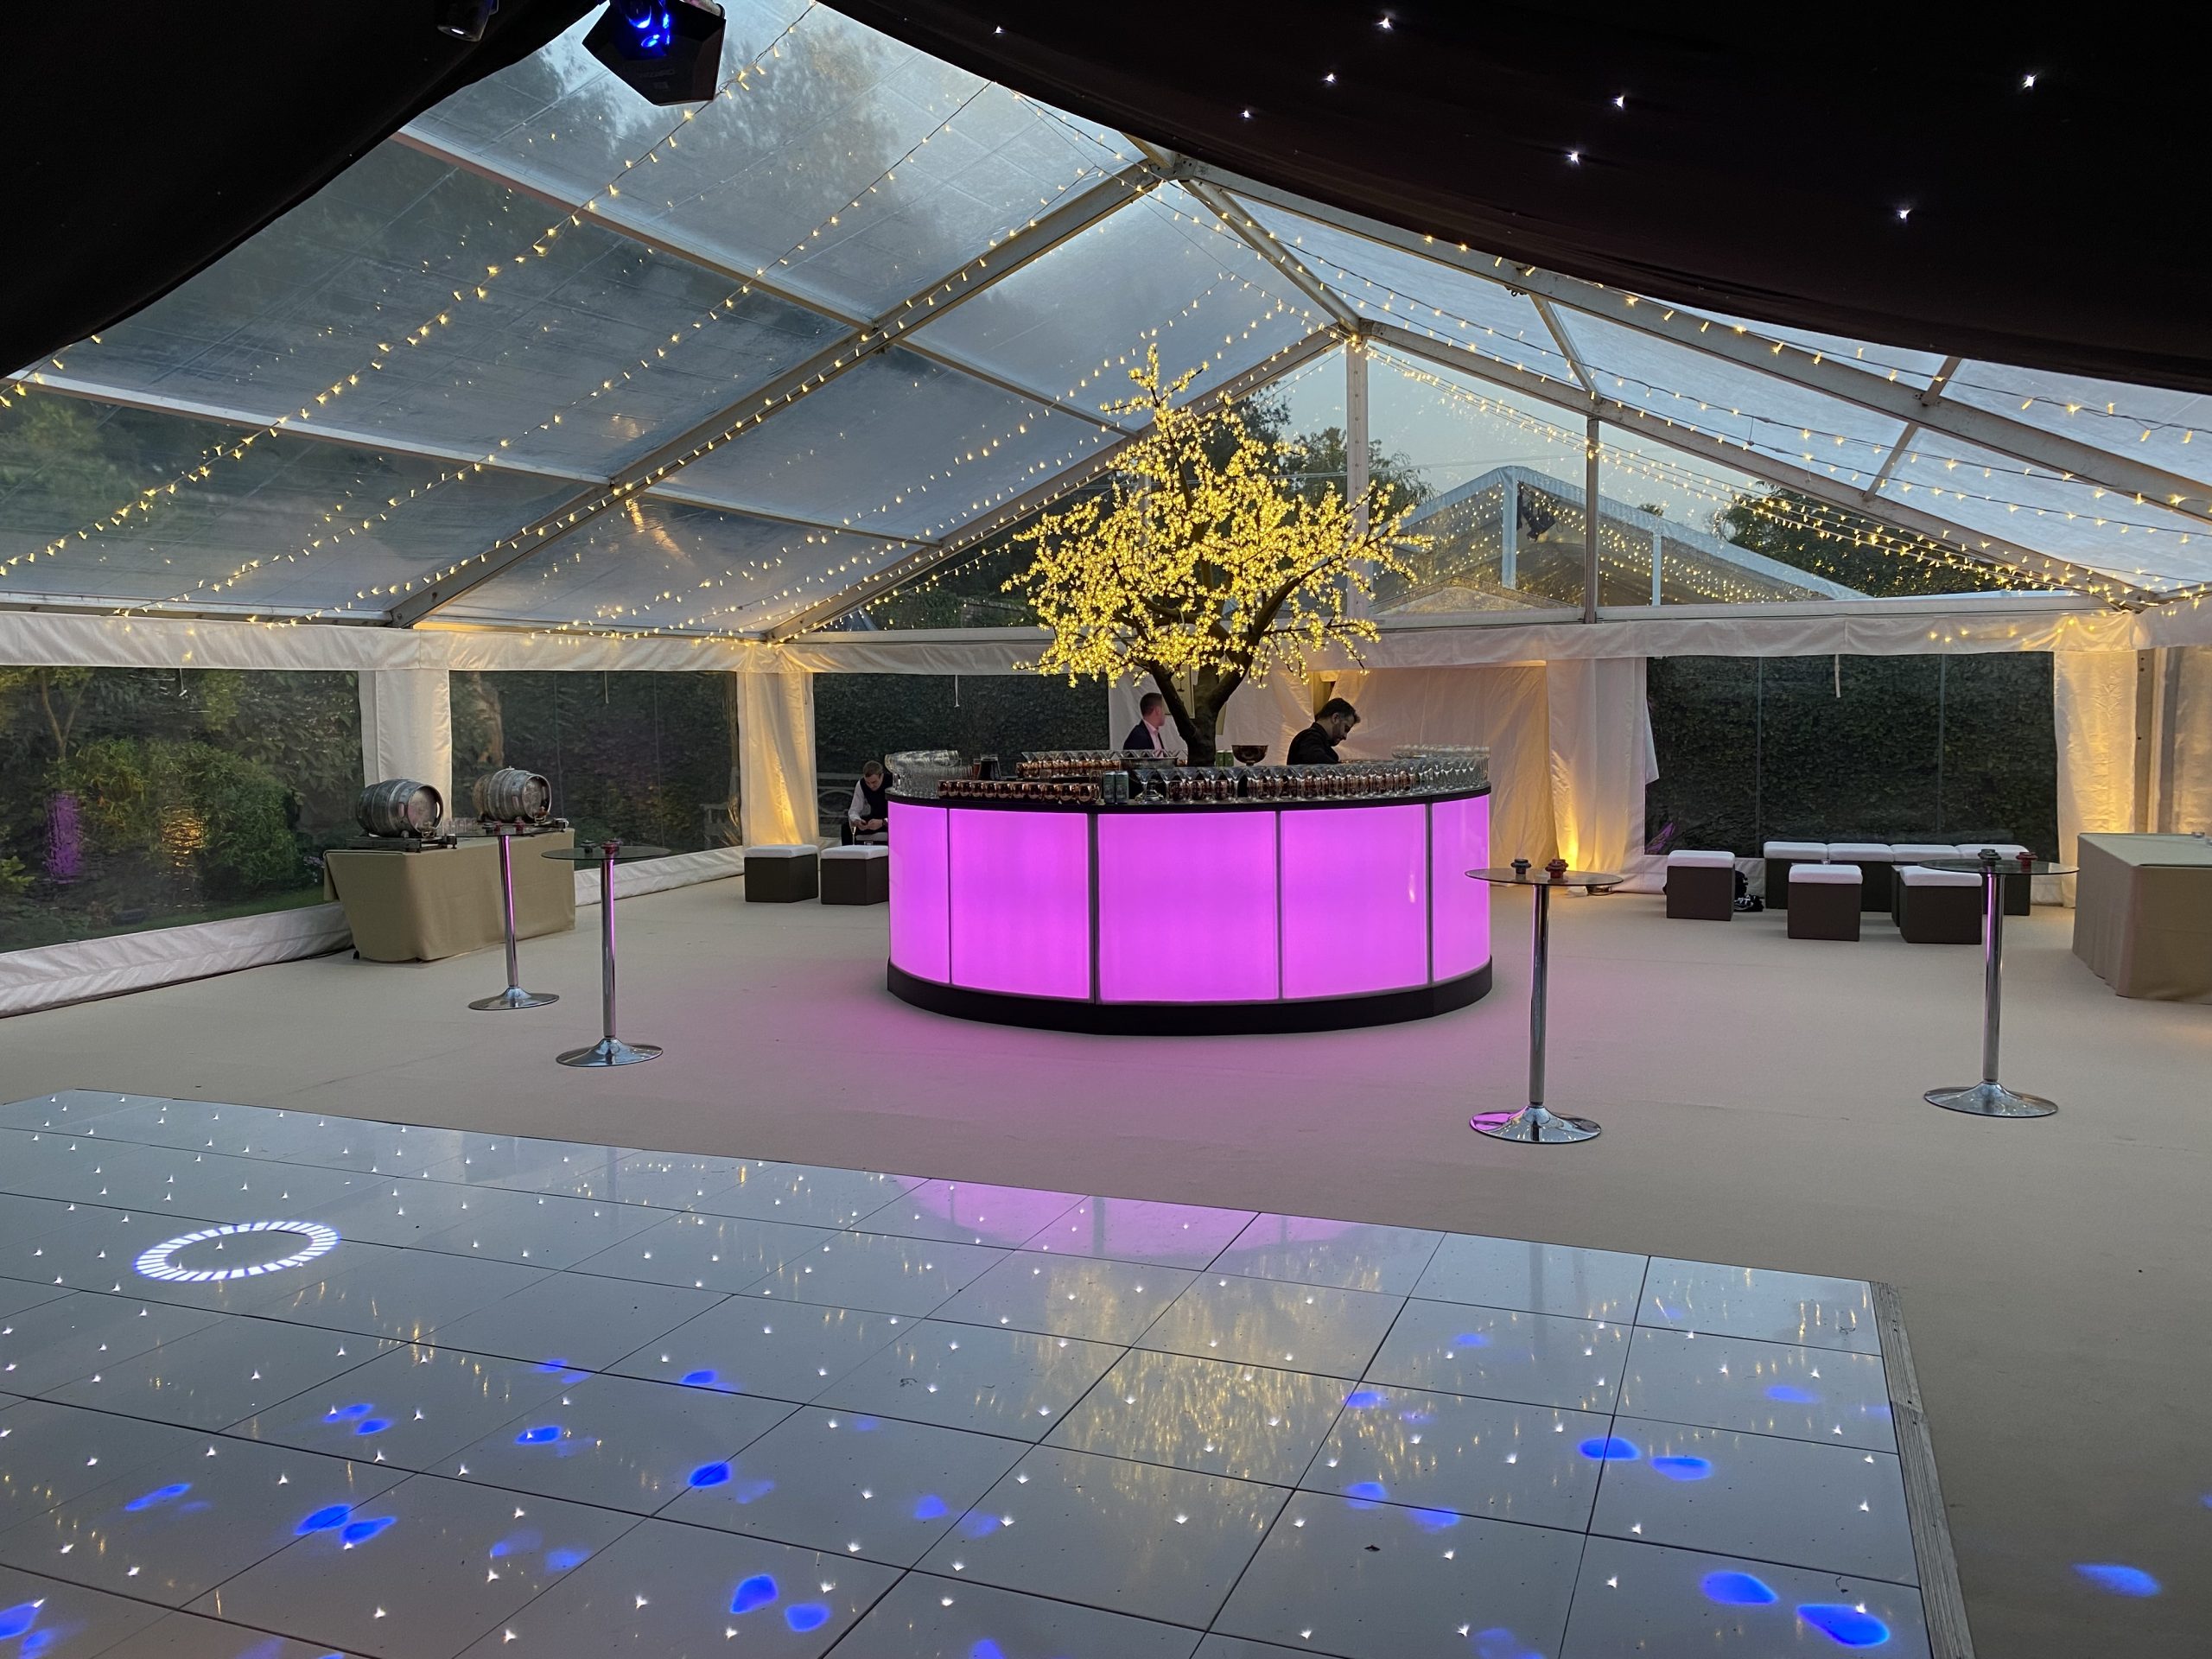 Starlit Bar and dance floor for parties with purple lighting around hired bar and fairy lit tree to centre of bar